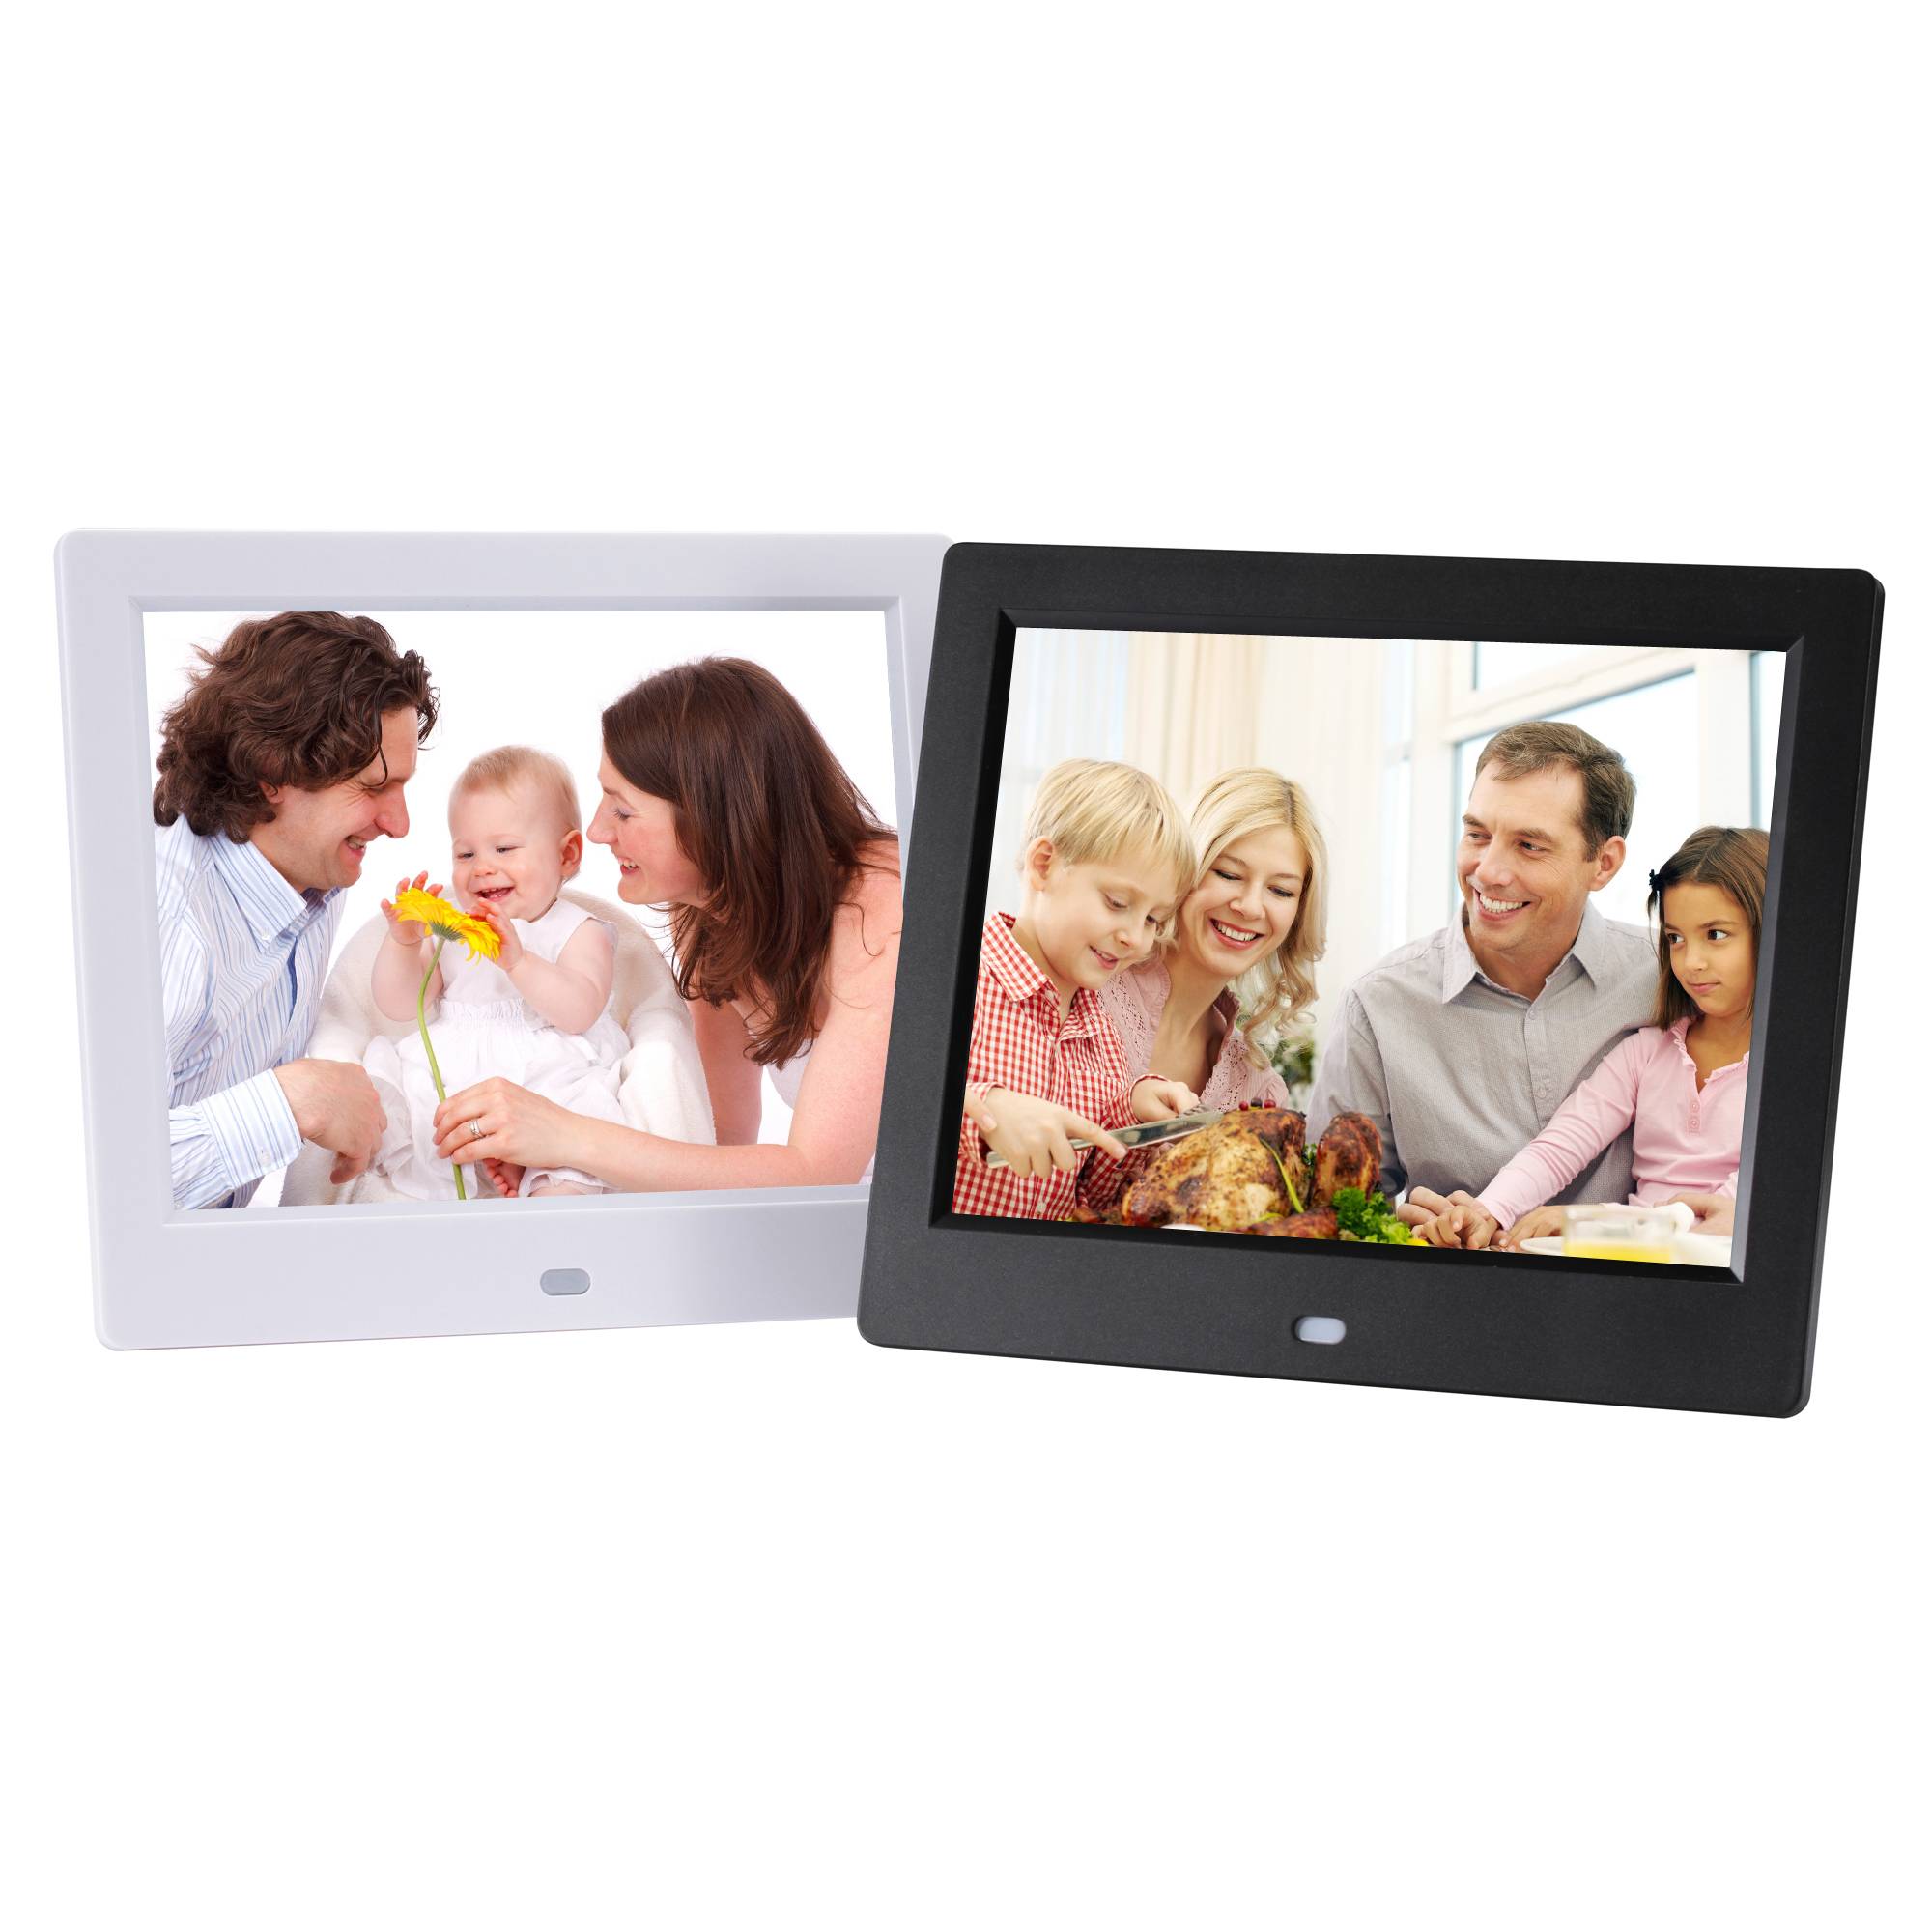 Wholesale Dealers of Lcd Picture Frame - 8 inch slideshow cheap video player digital picture frame digital photo frame commercial advertising HD support 720P – Idealway